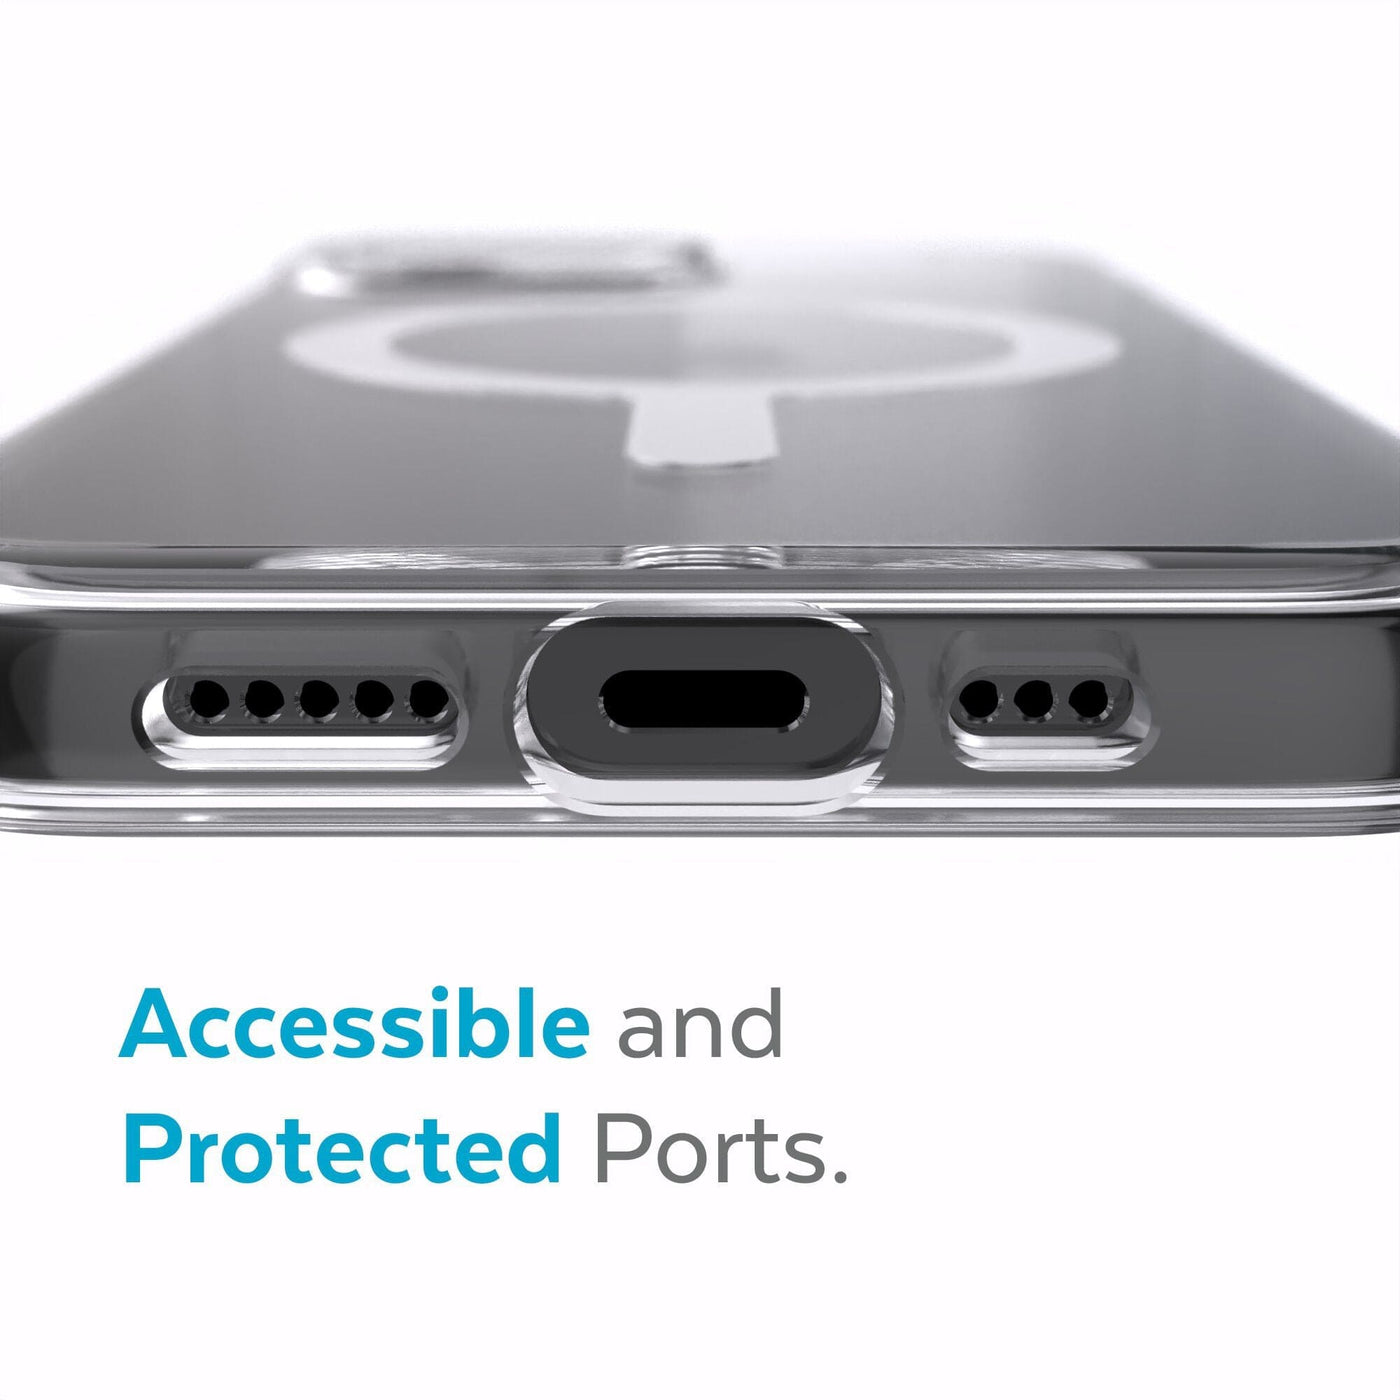 Speck Presidio Perfect-Clear MagSafe iPhone 12 / iPhone 12 Pro Cases Best iPhone  12 / iPhone 12 Pro - $49.99